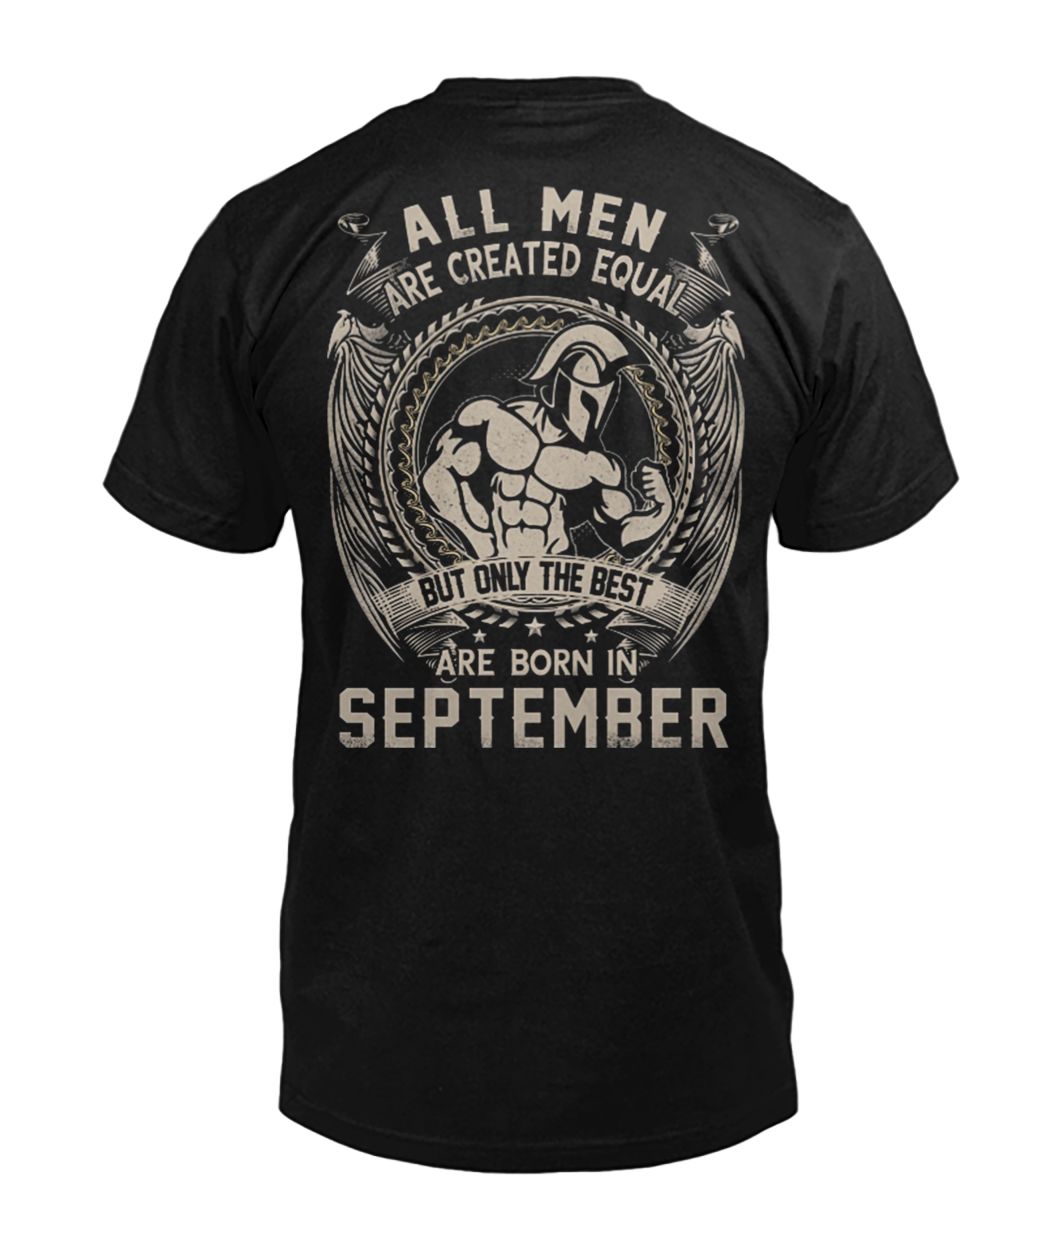 All men created equal but the best are born in september mens v-neck